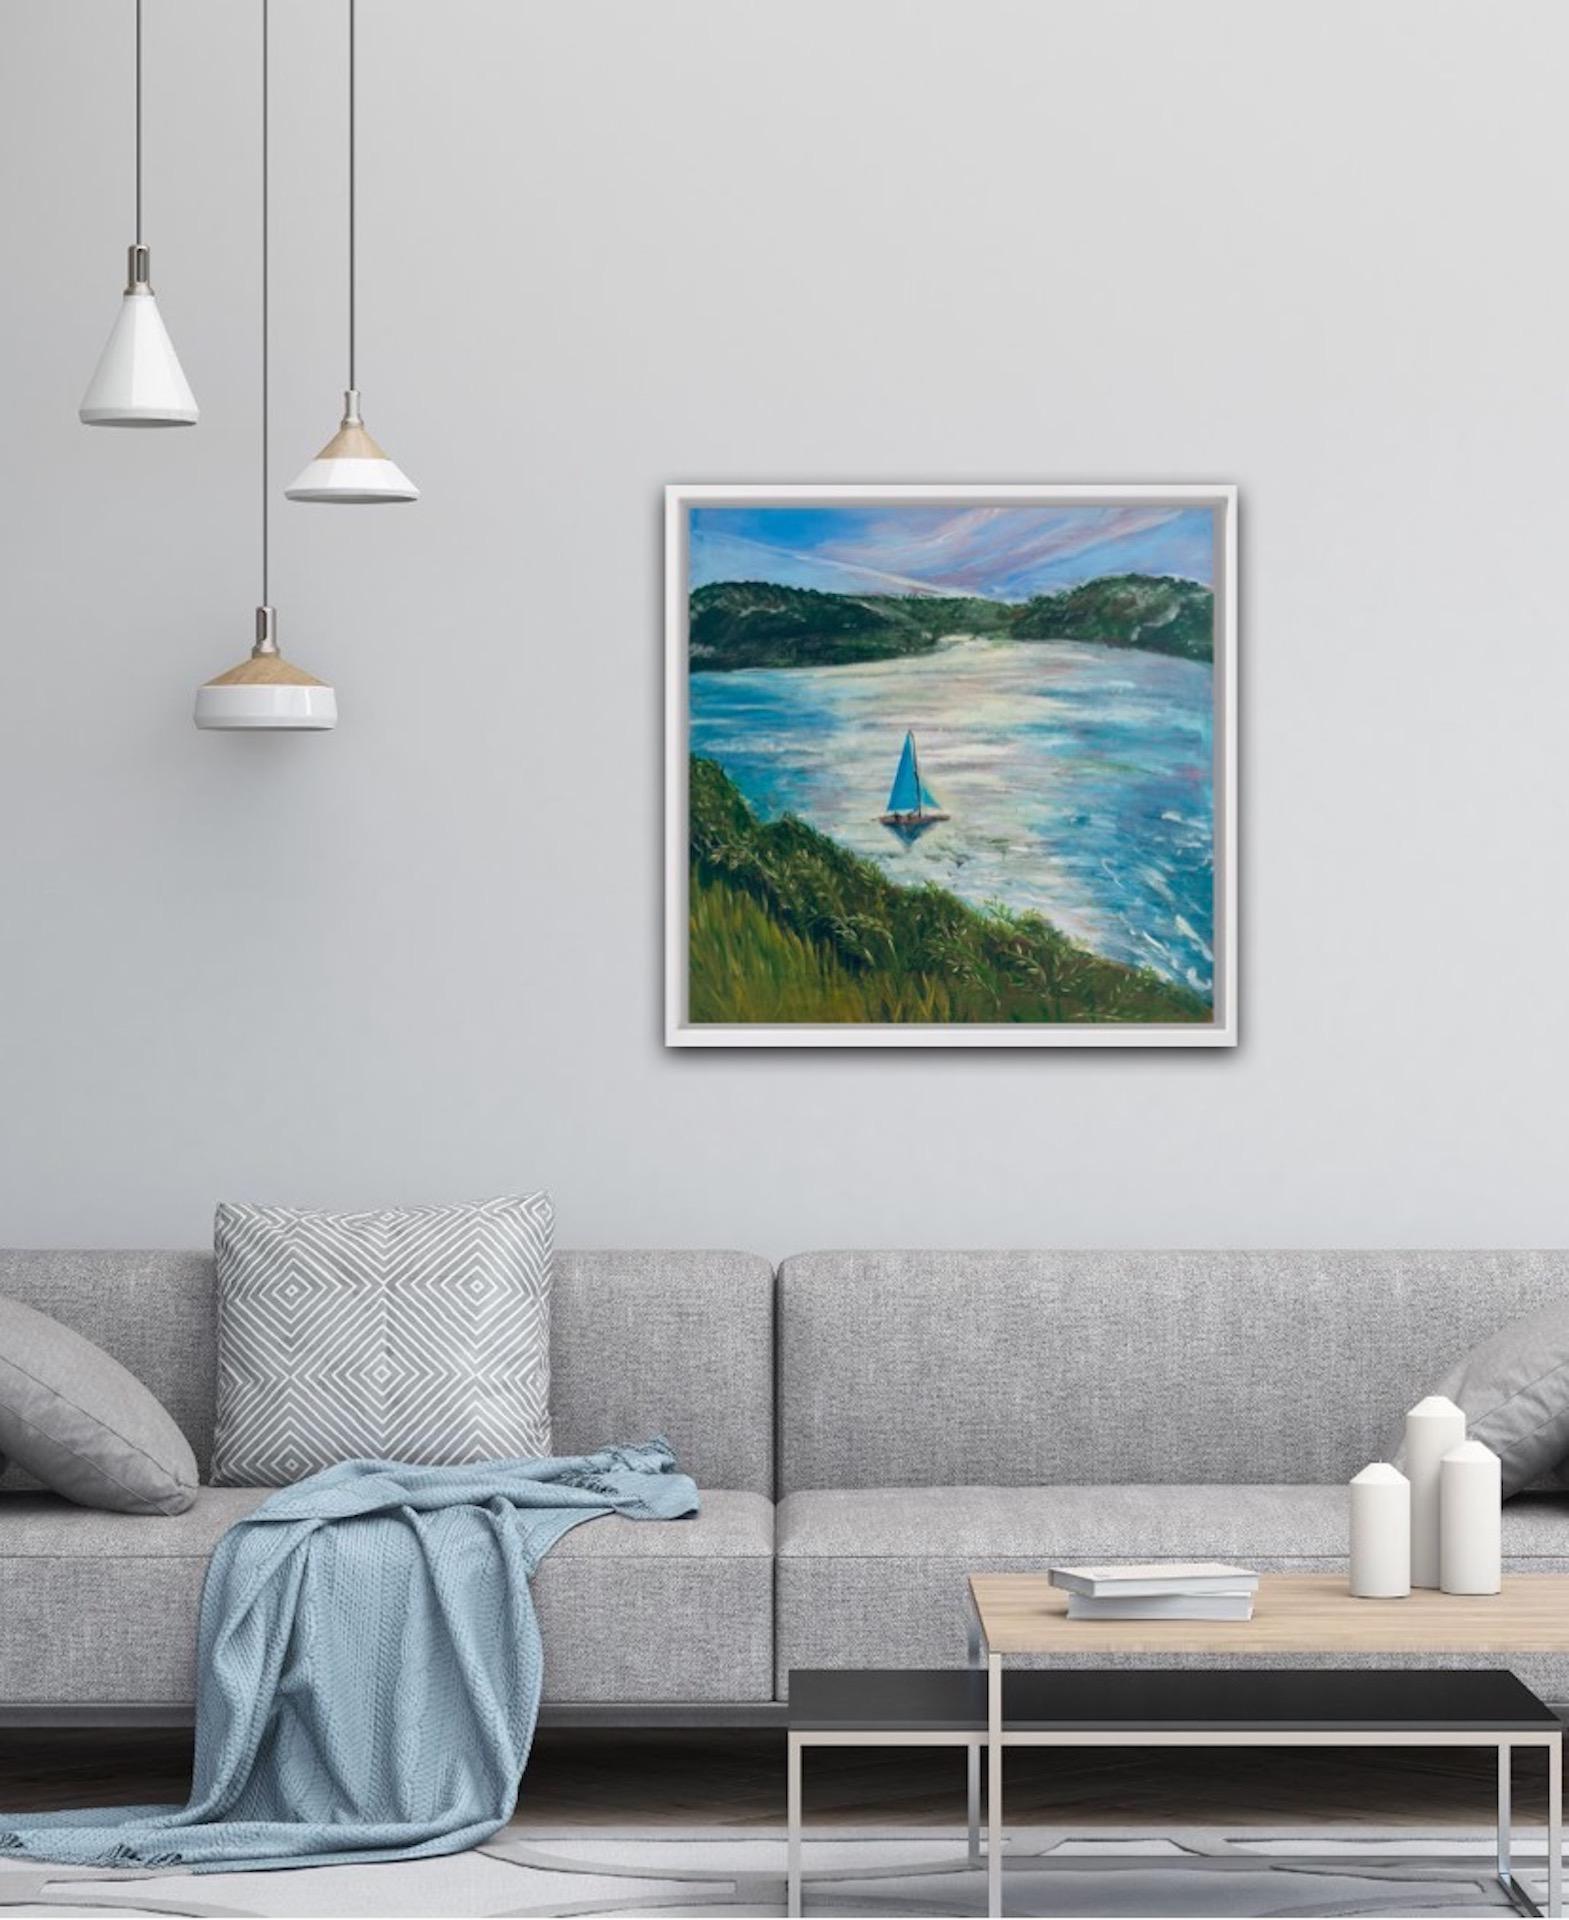 Peri Taylor
Turquoise Sails
Original Seascape Painting
Acrylic on Canvas
Size: H 60cm x W 60cm
Sold Unframed
(Please note that in situ images are purely an indication of how a piece may look).

Turquoise Sails is an original seascape painting by